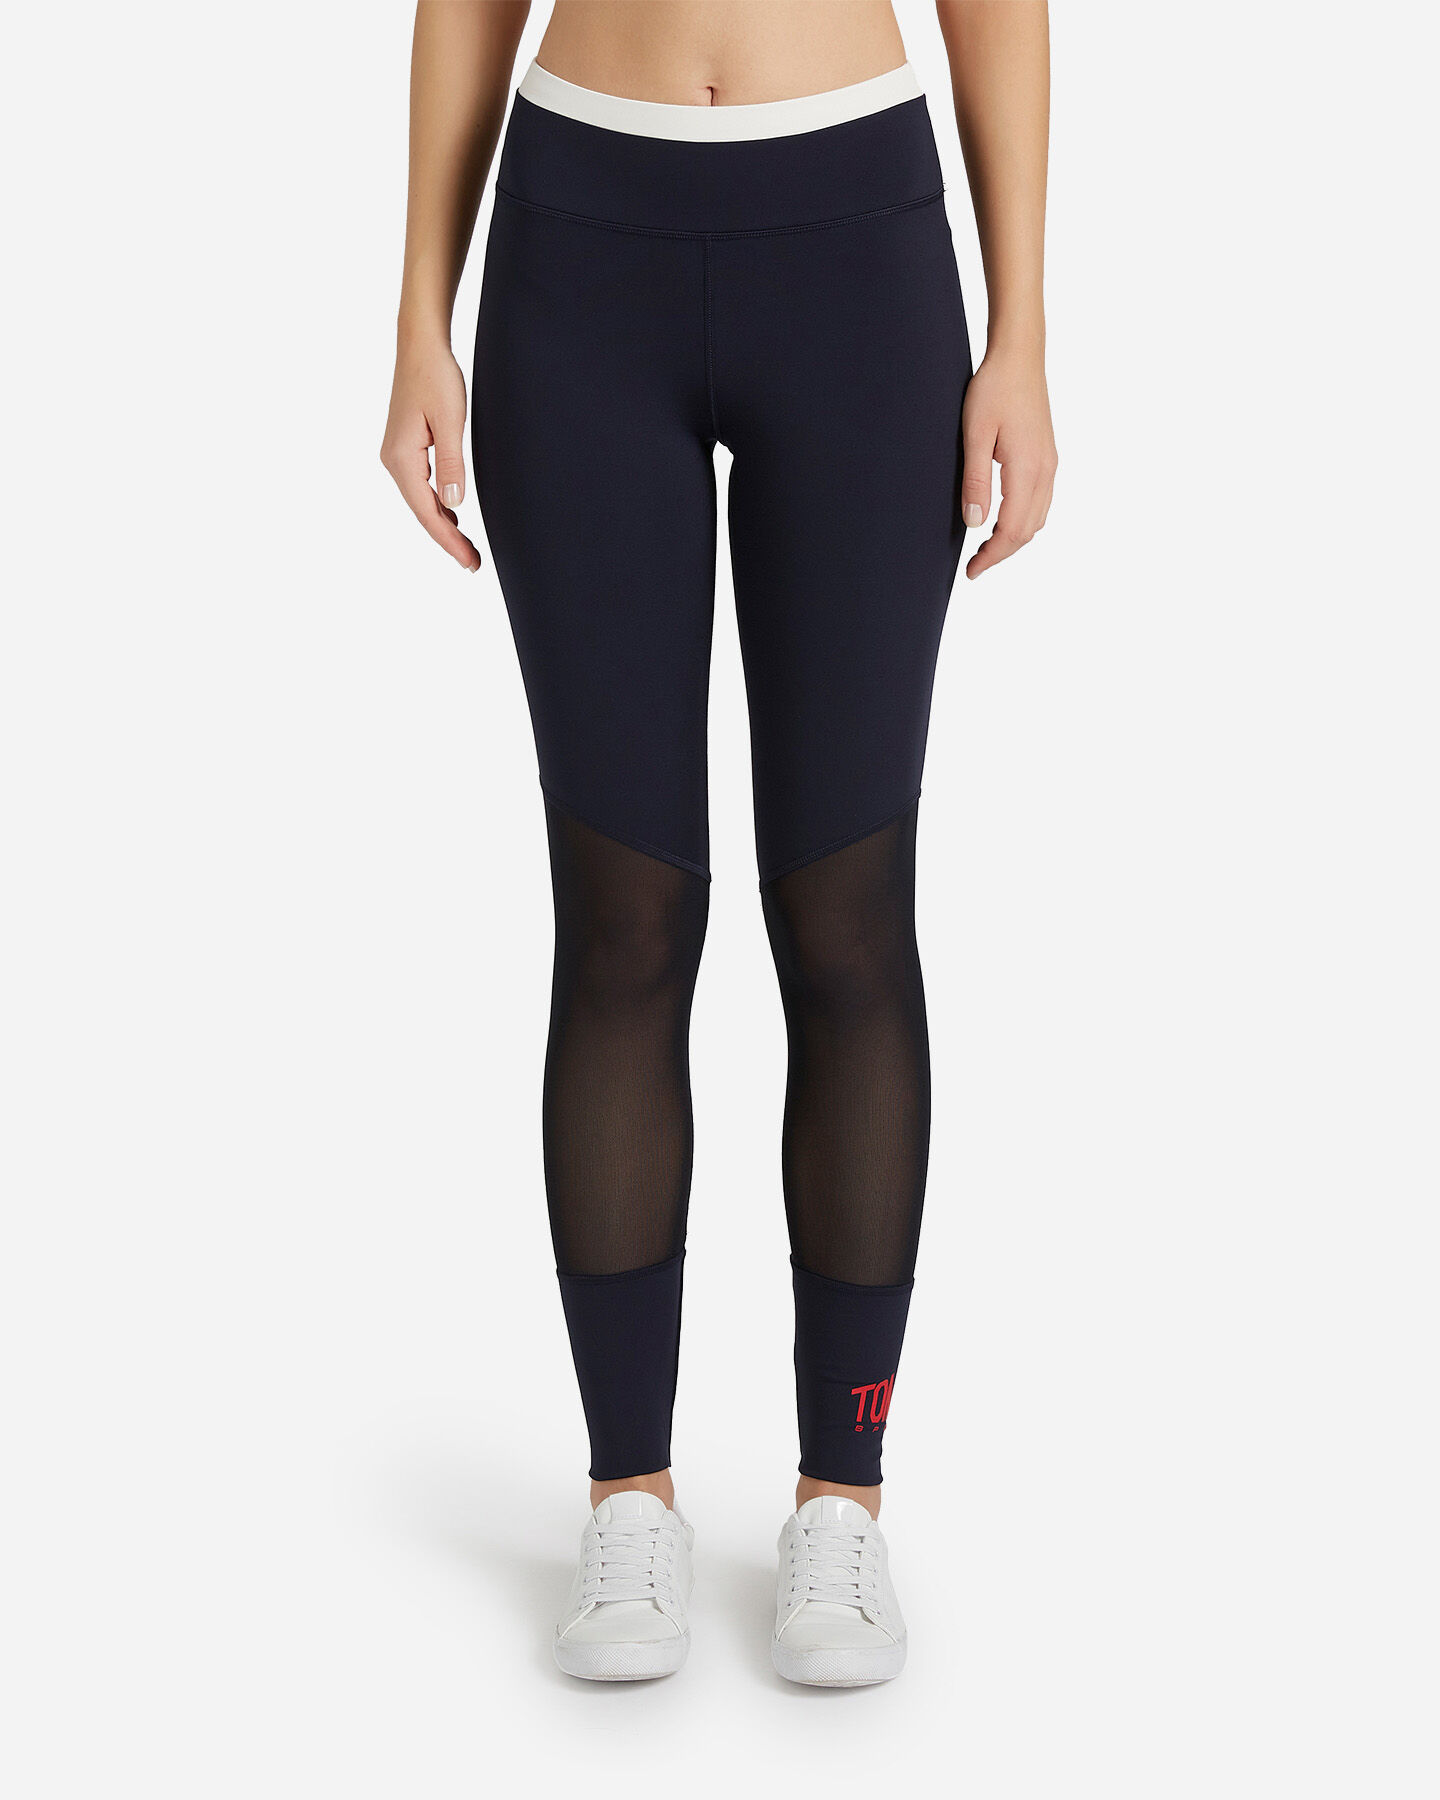  Leggings TOMMY HILFIGER INSERT MESH W S4082522|DW5|XS scatto 0